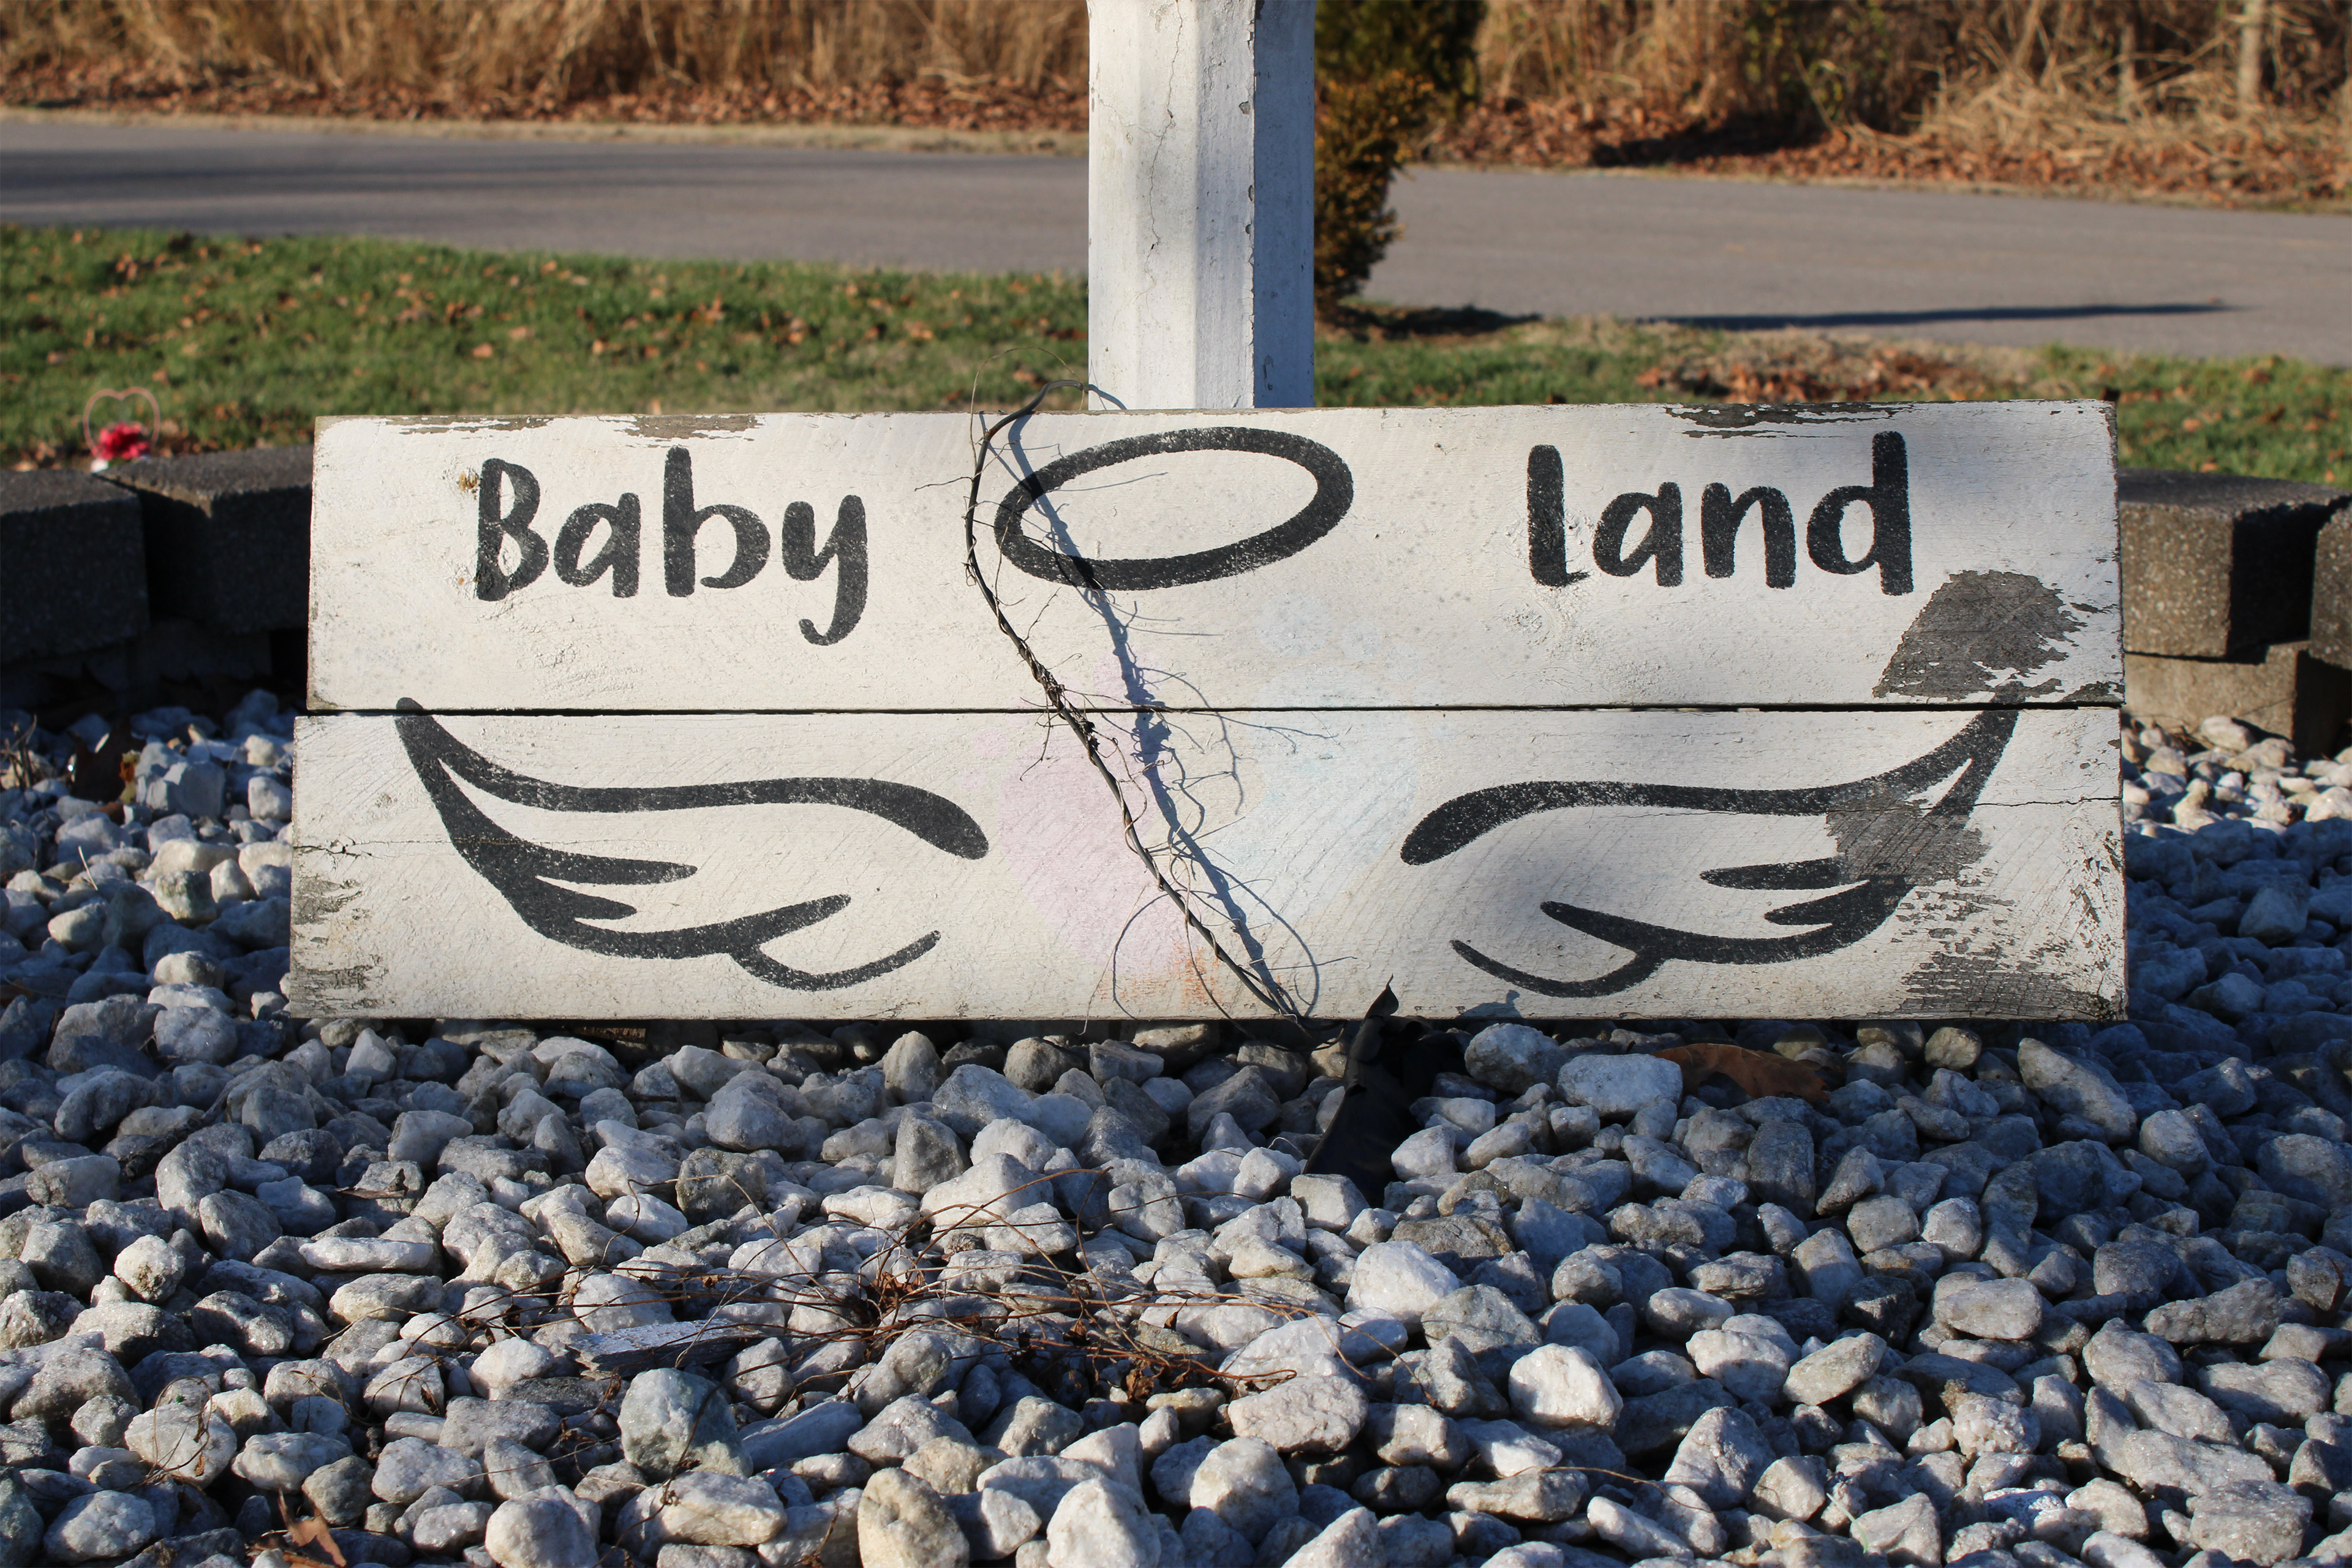 A photo shows a sign in a cemetary labeled, "Baby land." It is painted with angel wings and a halo.